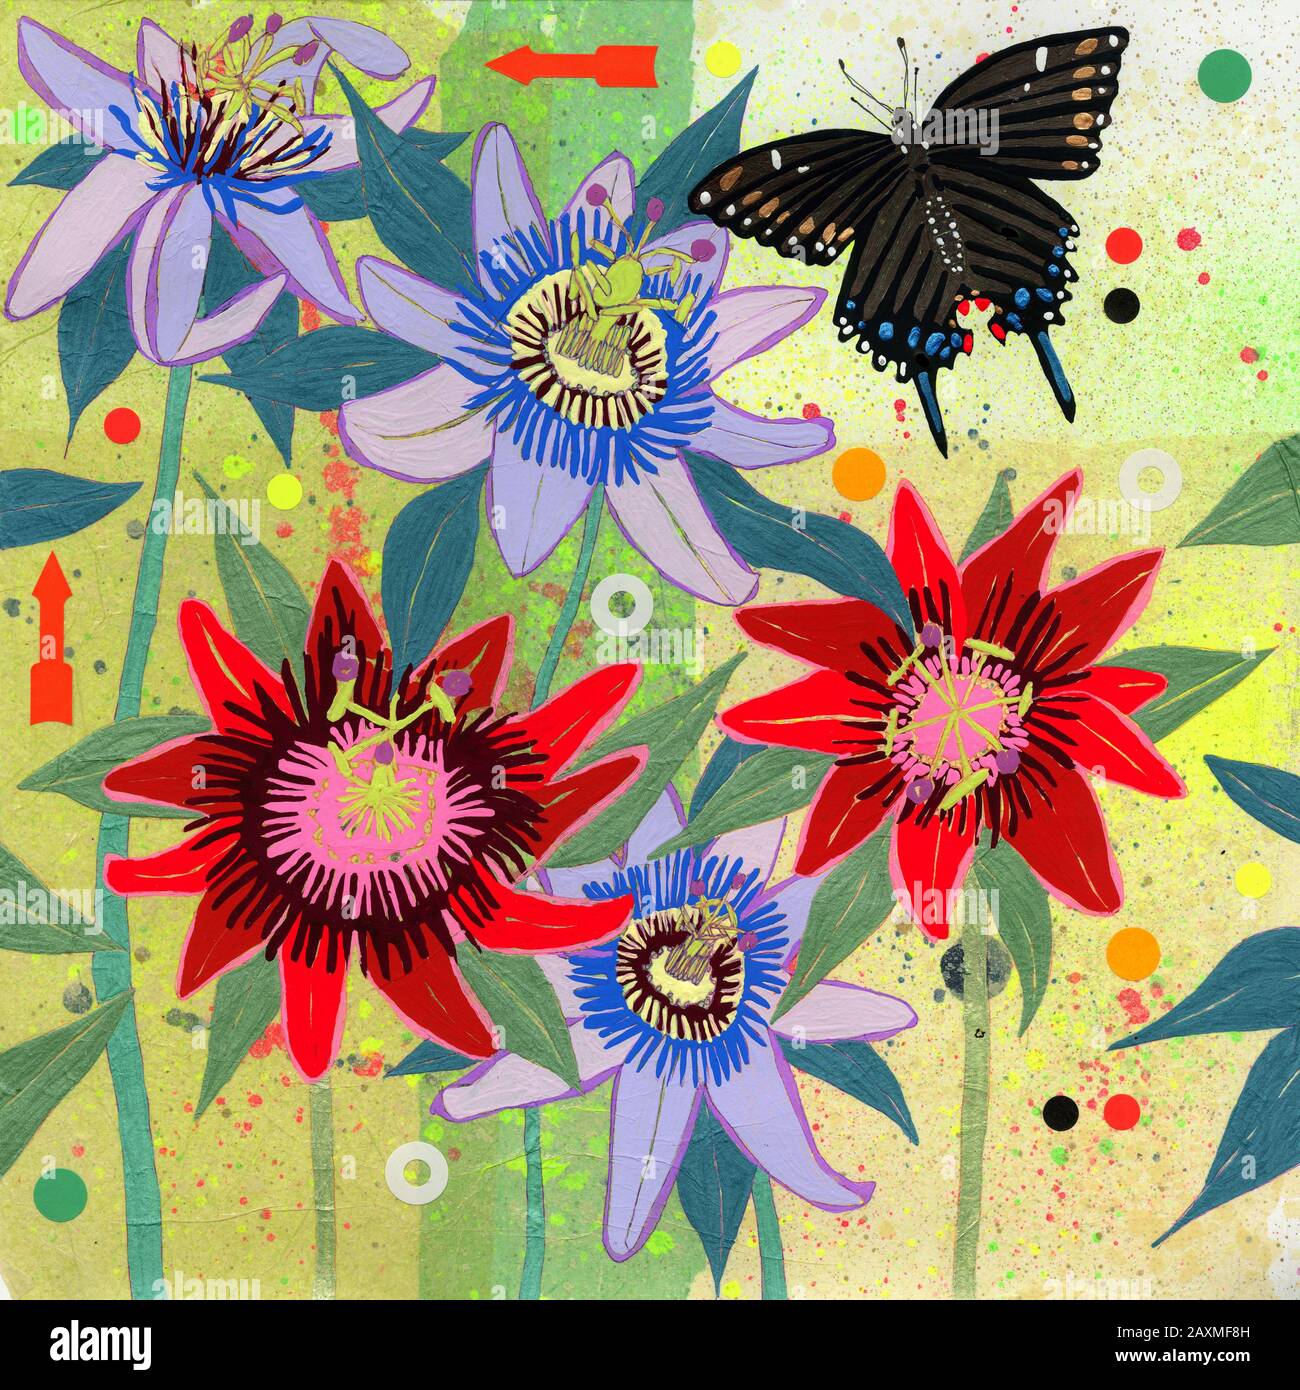 Black Swallowtail Butterfly and Passion Flowers (Passiflora) Stock Photo